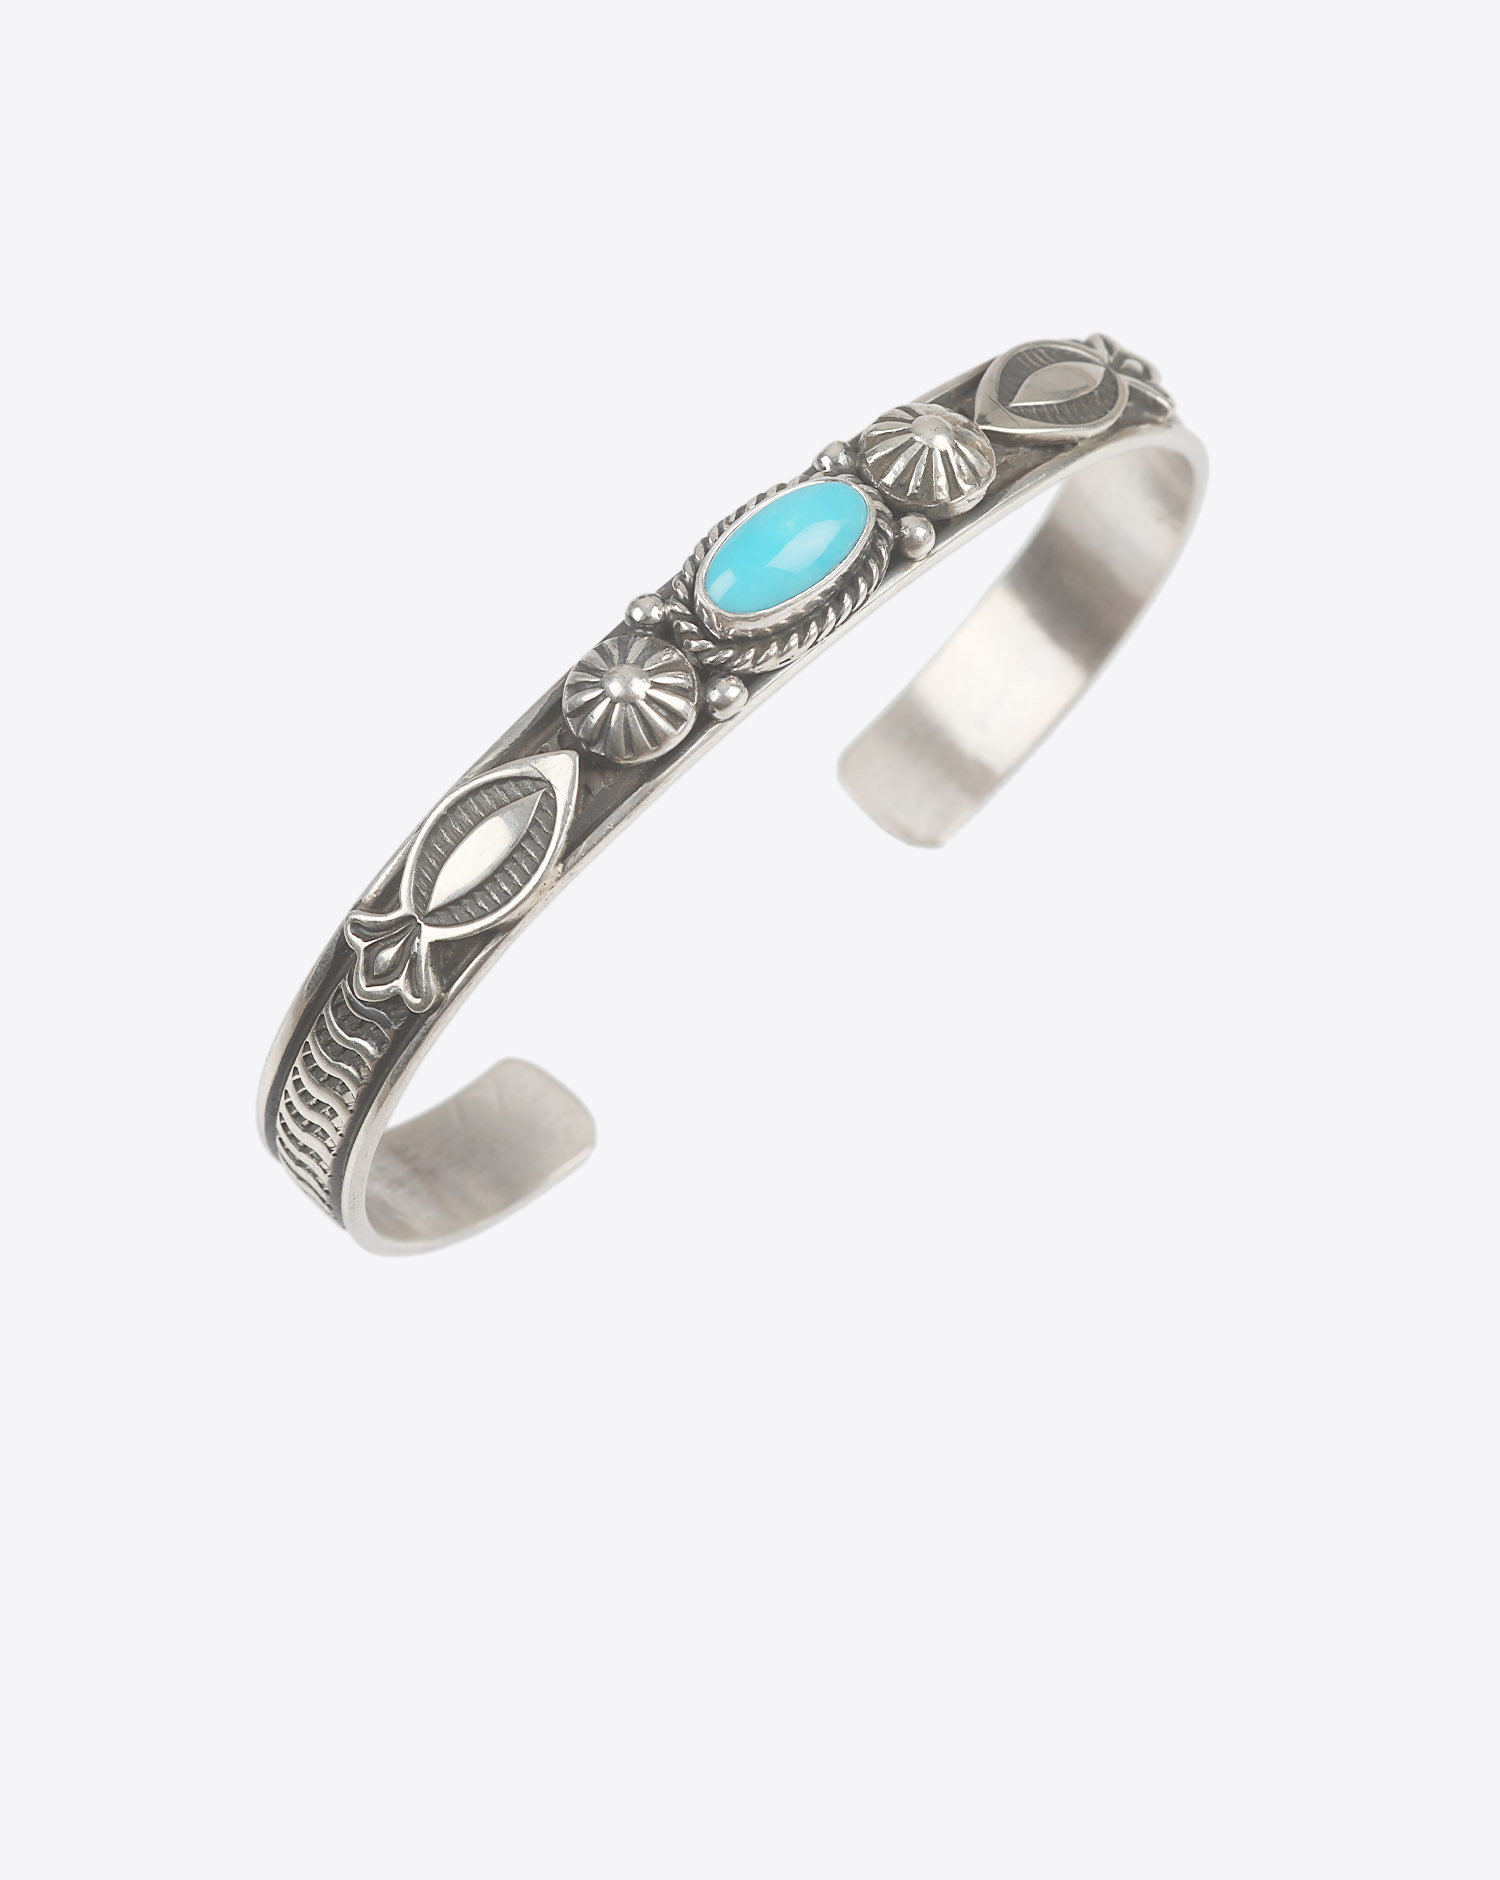 Arizona Sleeping Beauty Turquoise Bangle Bracelet with Natural Cambodian  Zircon (Size - 7.5) in Platinum Plated Sterling Silver 3.93 Ct, Silver Wt.  17.50 Gms - 8959103 - TJC